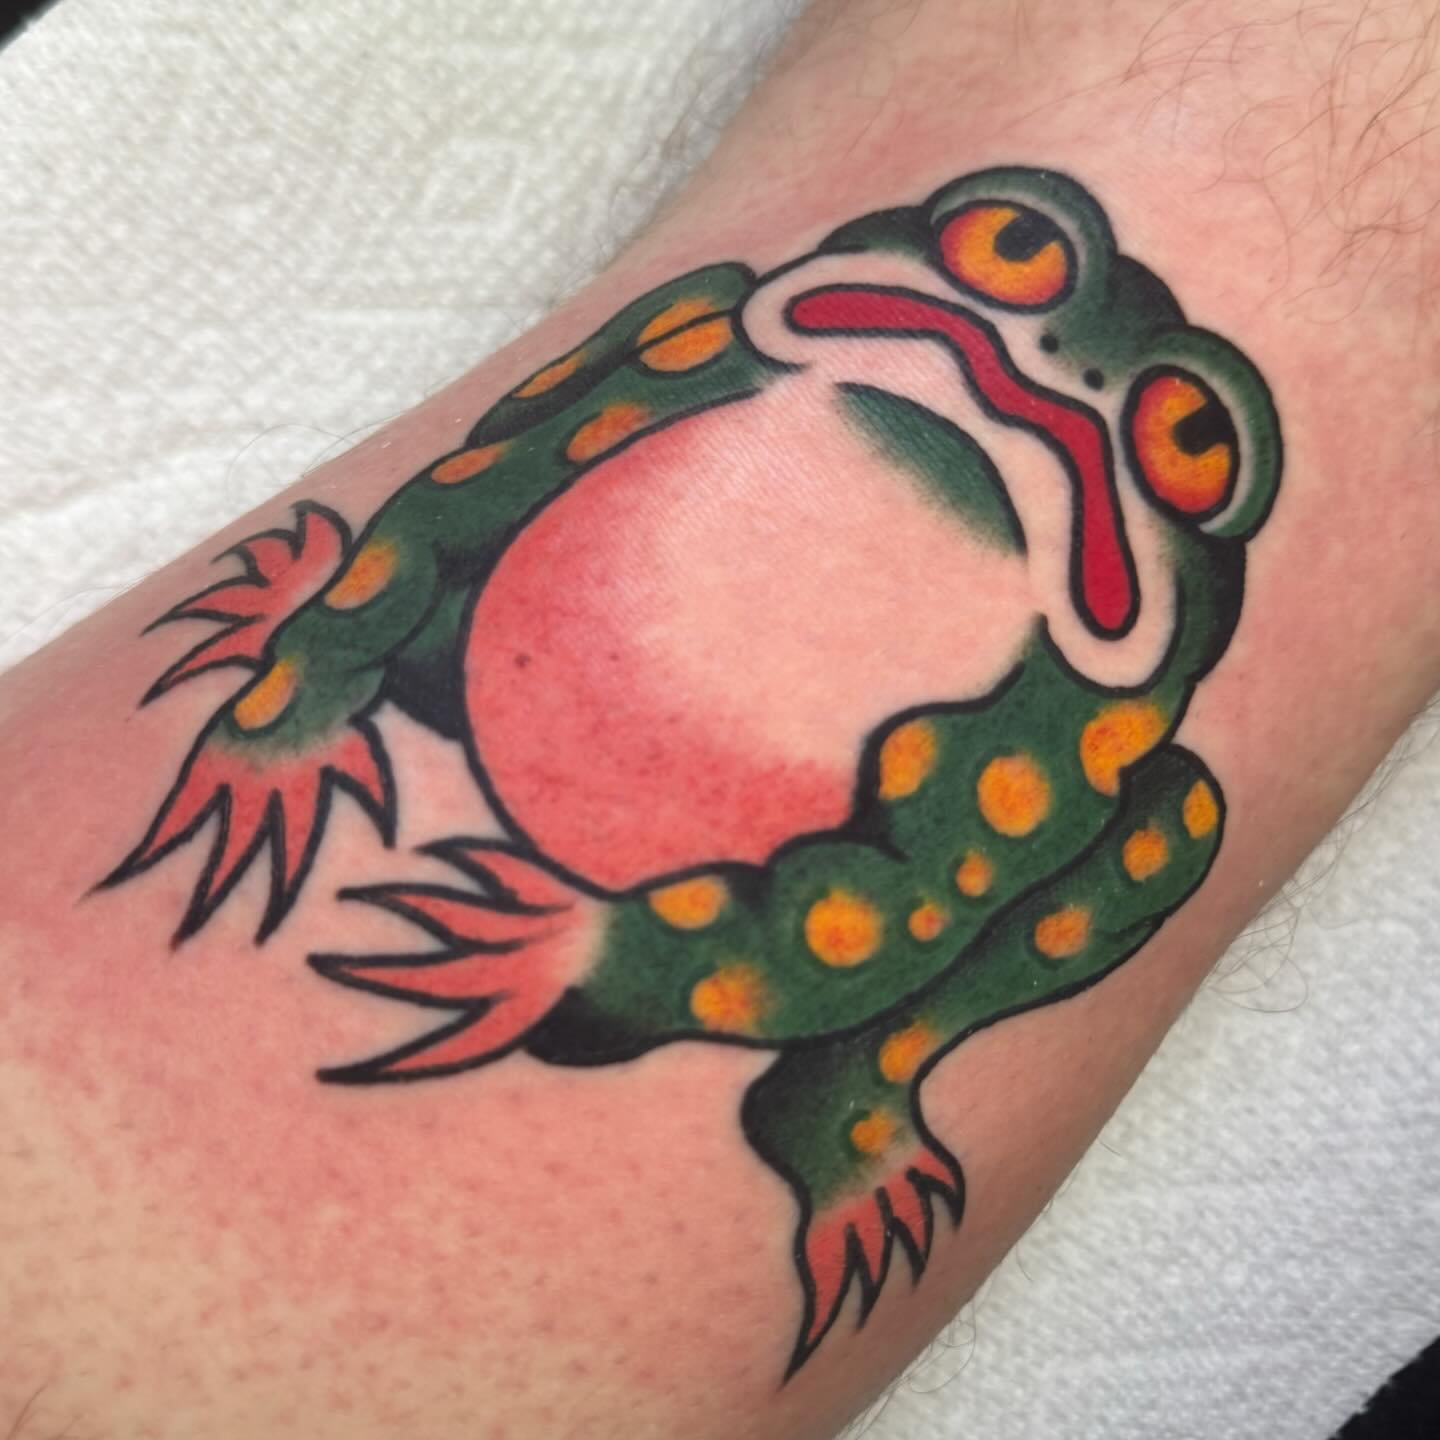 Got to make this whimsical frog for Zach @keepsakeokc 

Thanks for the trust!

Booking appointments now for end of may, Tuesday-Friday, at 11am and 3pm, walk-ins on Saturdays!

#tattooflash #classictattoo #vintagetattoo #traditionaltattooflash #tatto